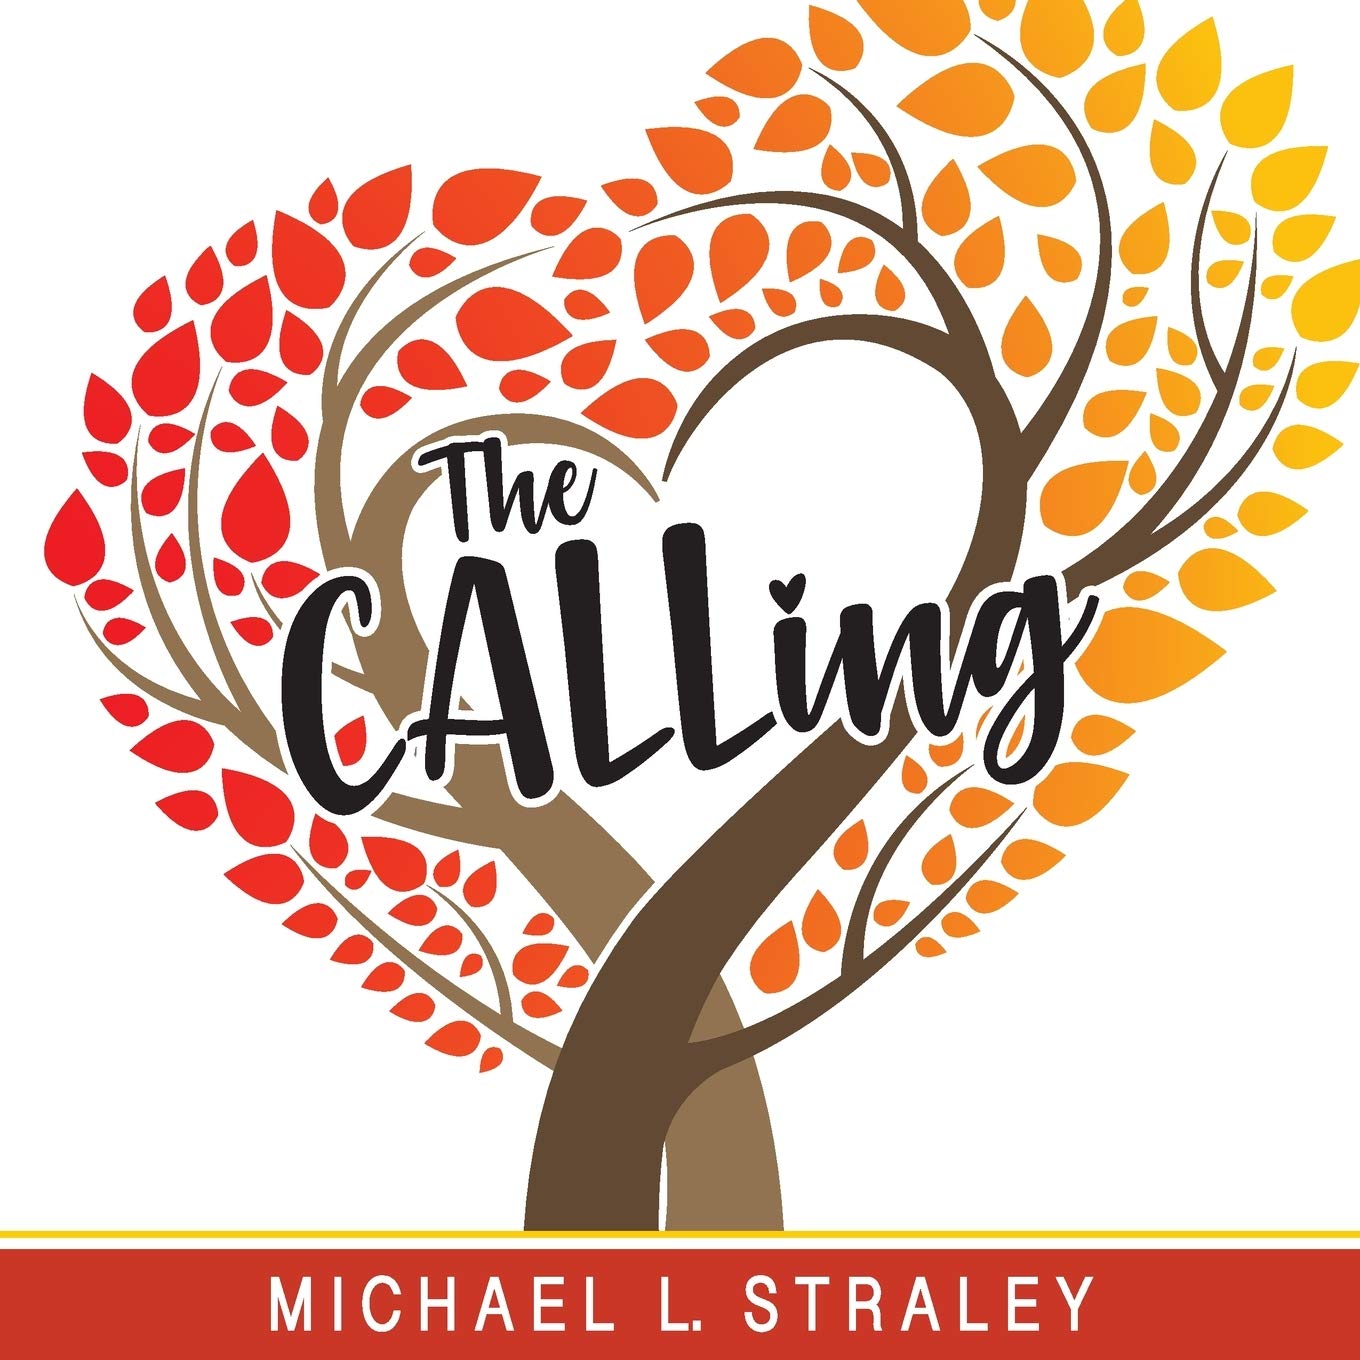 The CALLing book cover